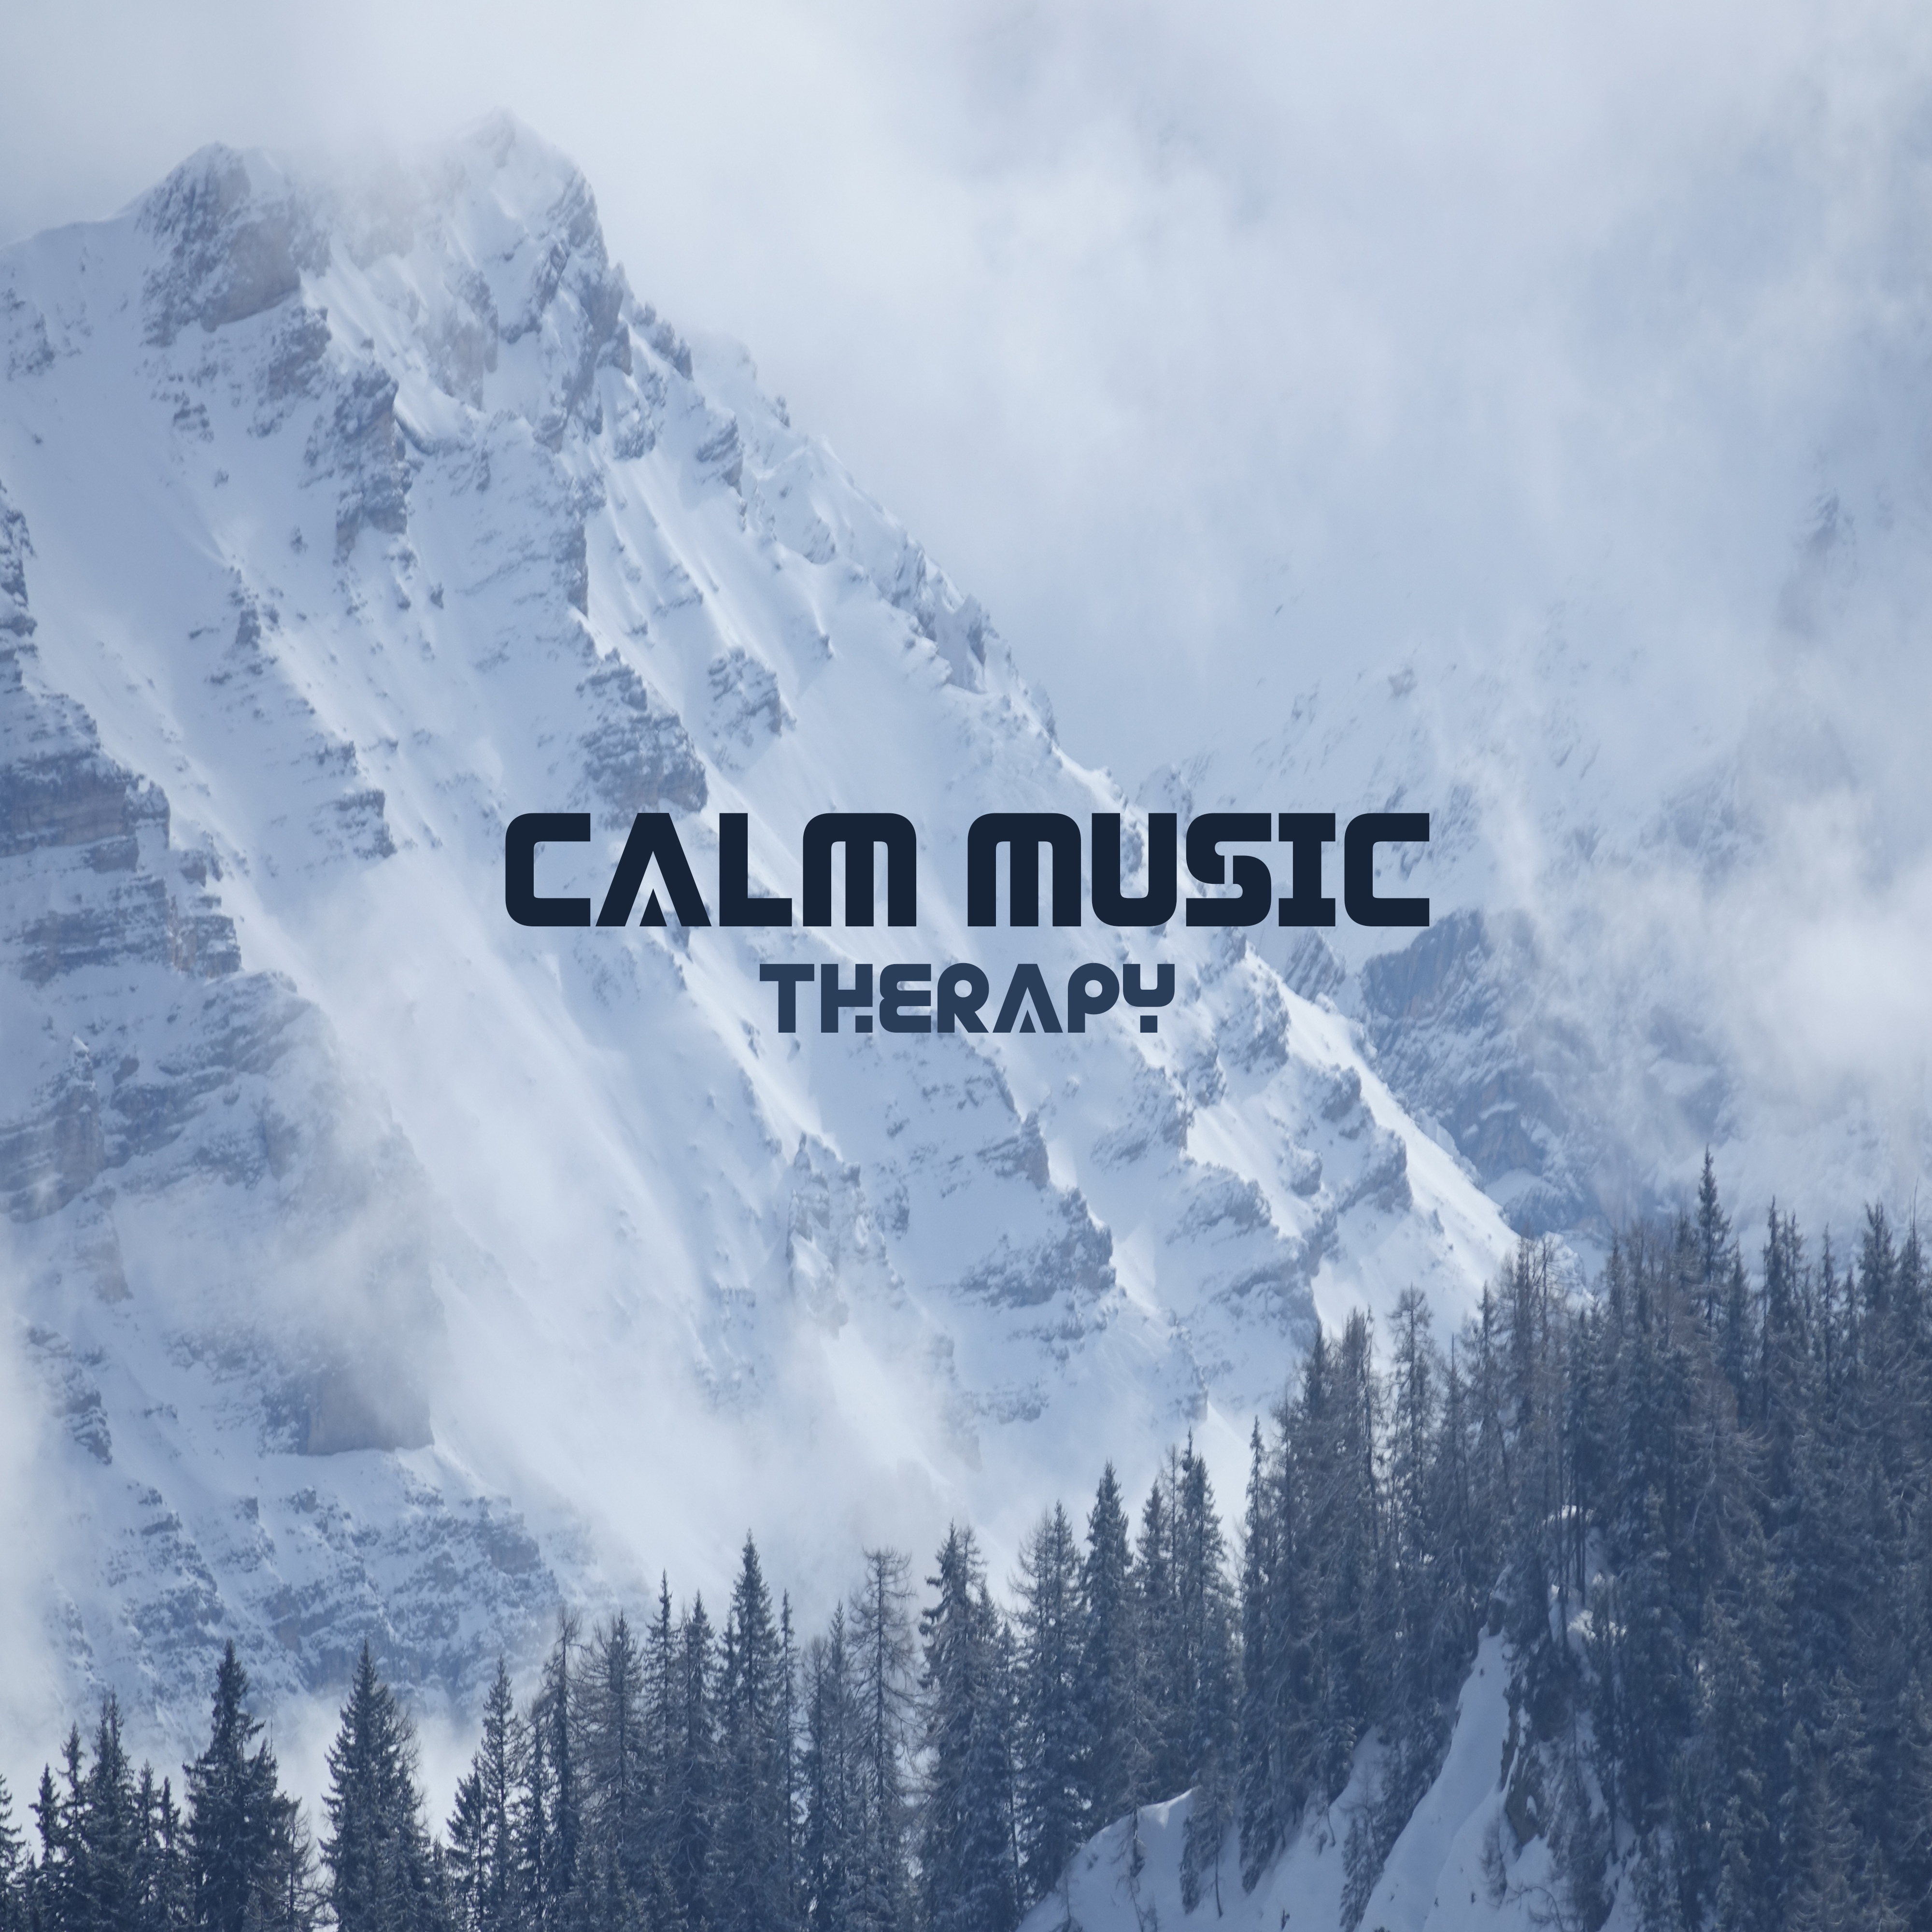 Calm Music Therapy